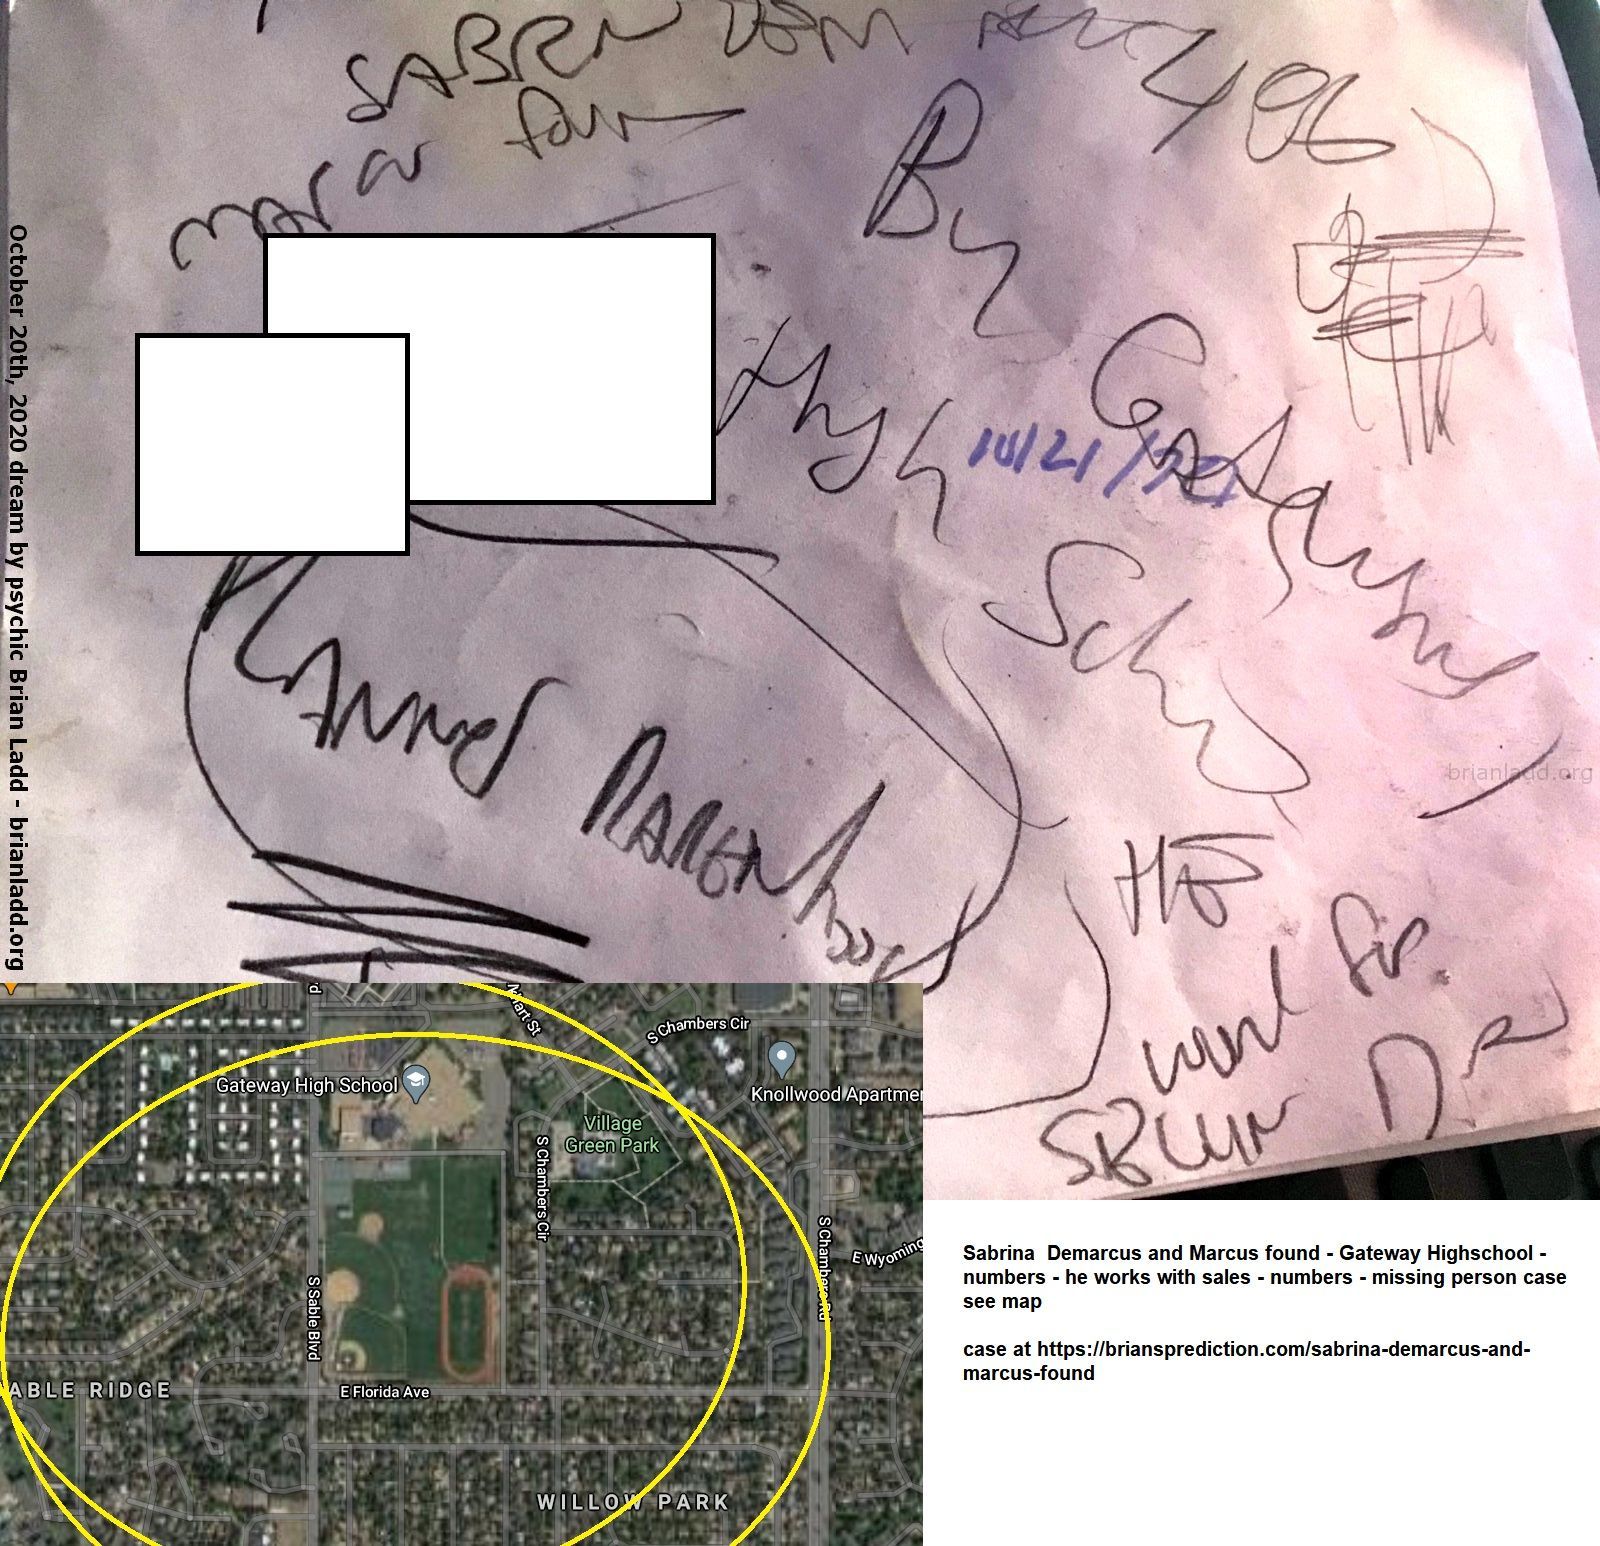 13888 21 October 2020 6 - Sabrina  Demarcus And Marcus Found - Gateway Highschool - Numbers - He Works With Sales - Numb...
Sabrina  Demarcus And Marcus Found - Gateway Highschool - Numbers - He Works With Sales - Numbers - Missing Person Case See Map  Case At   https://briansprediction.com/Sabrina-Demarcus-And-Marcus-found
